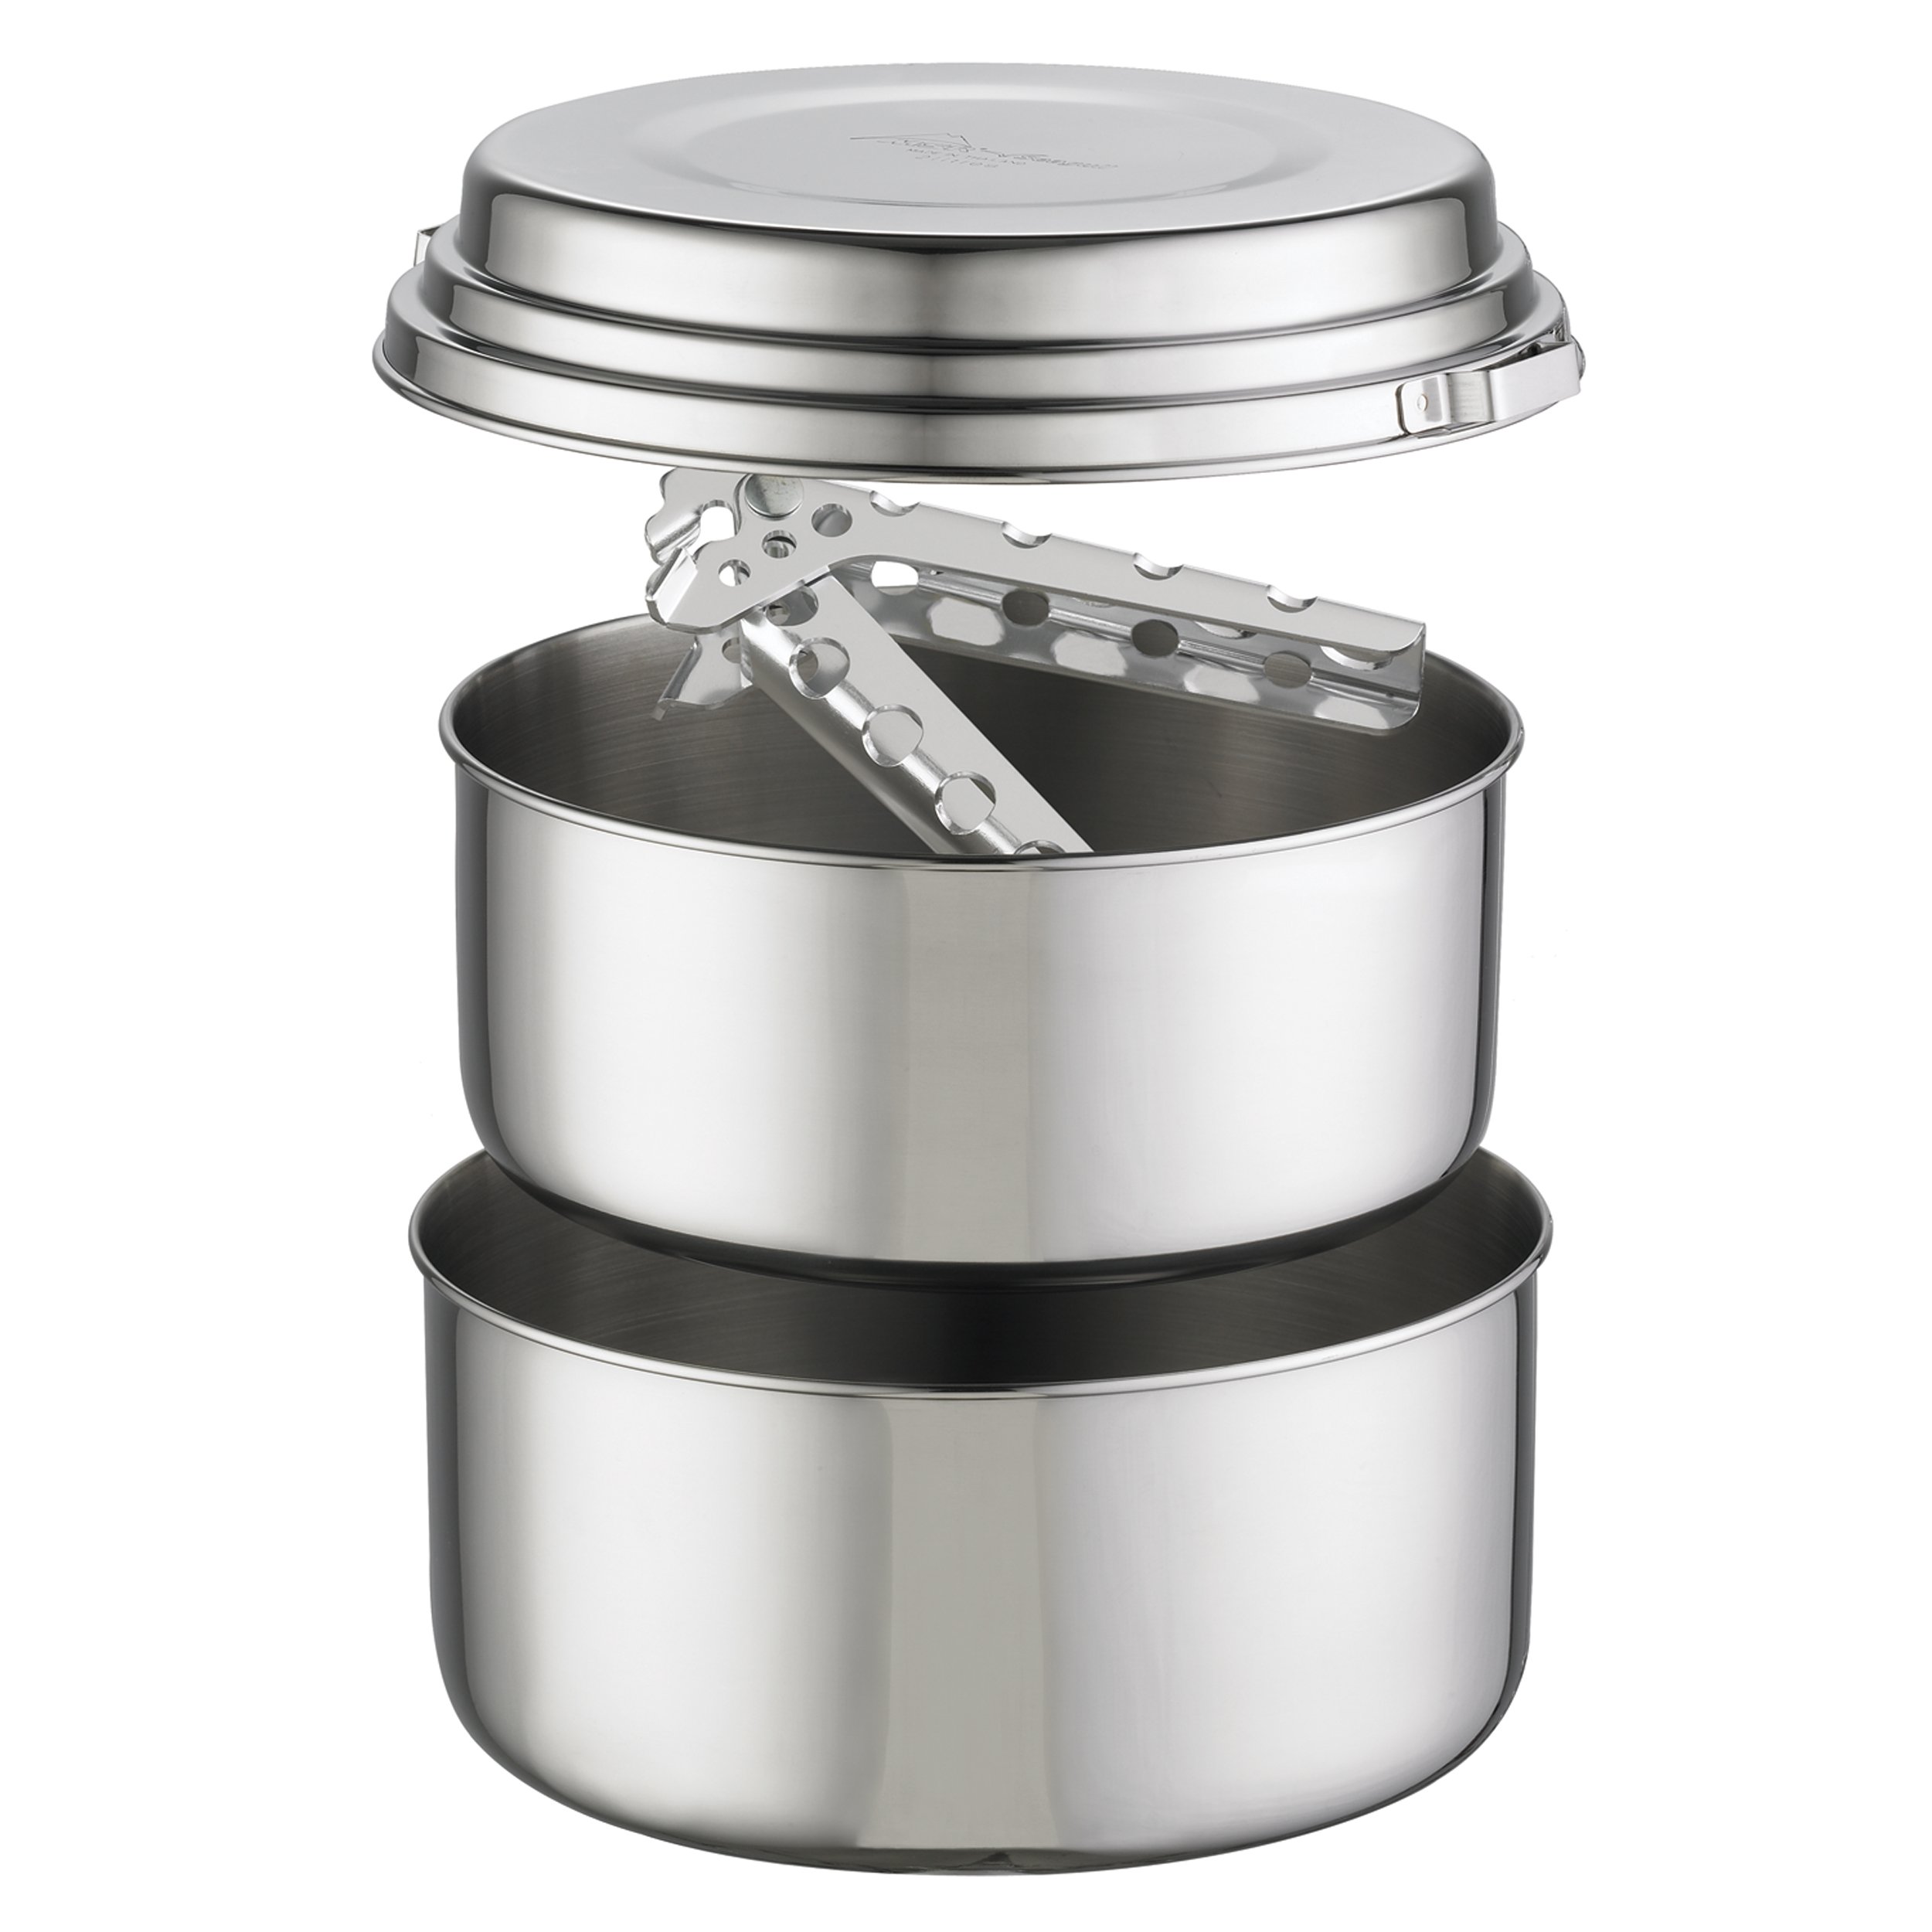 Large Capacity Stainless Steel Pot Sets, Natural Color, Dishwasher